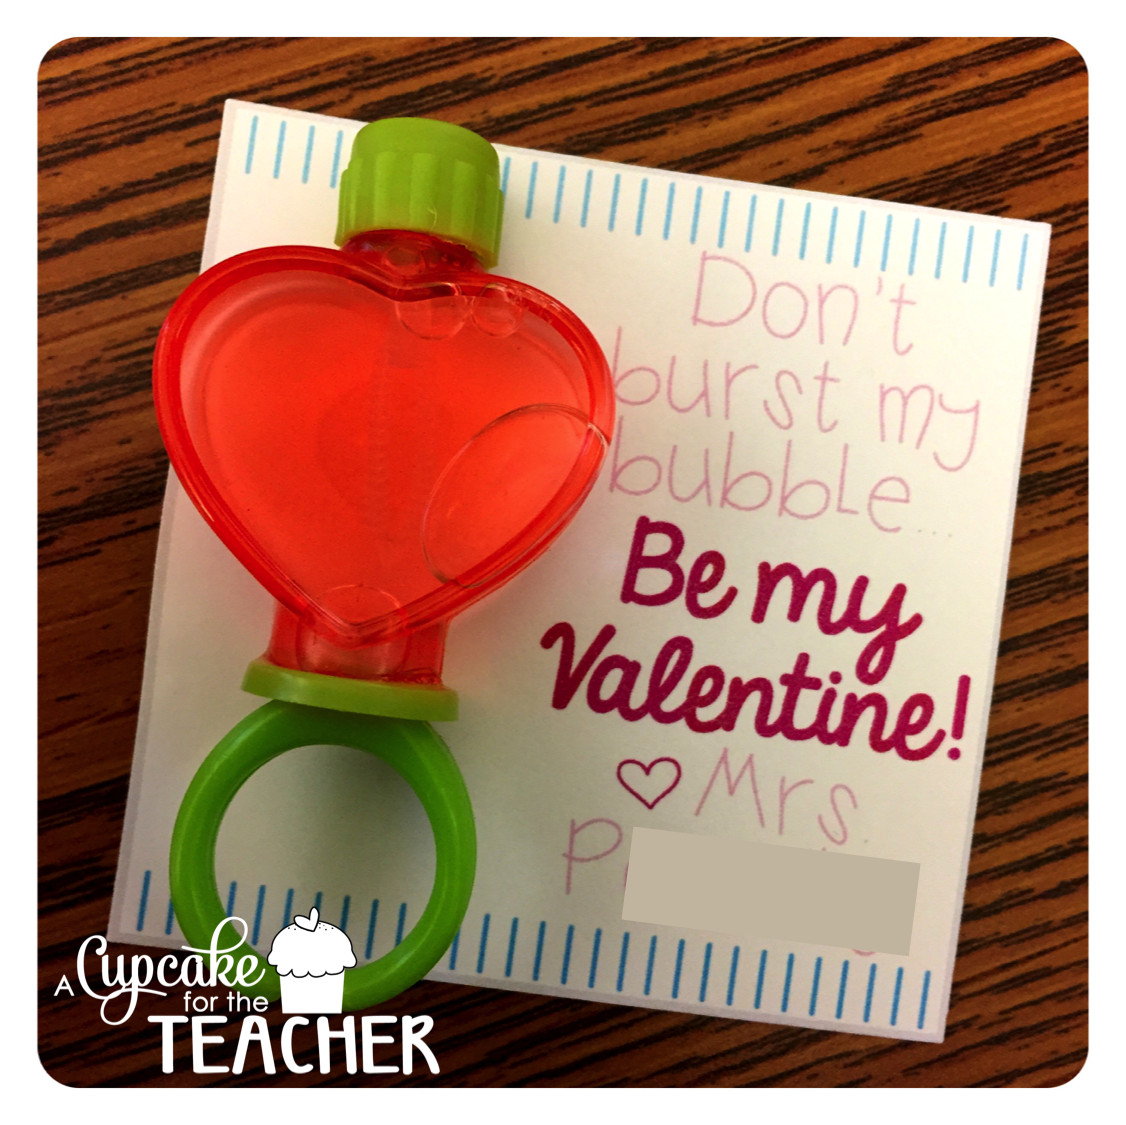 Valentines Day Gift Ideas For Parents
 Valentine Gift Ideas Coworkers Students Parents A